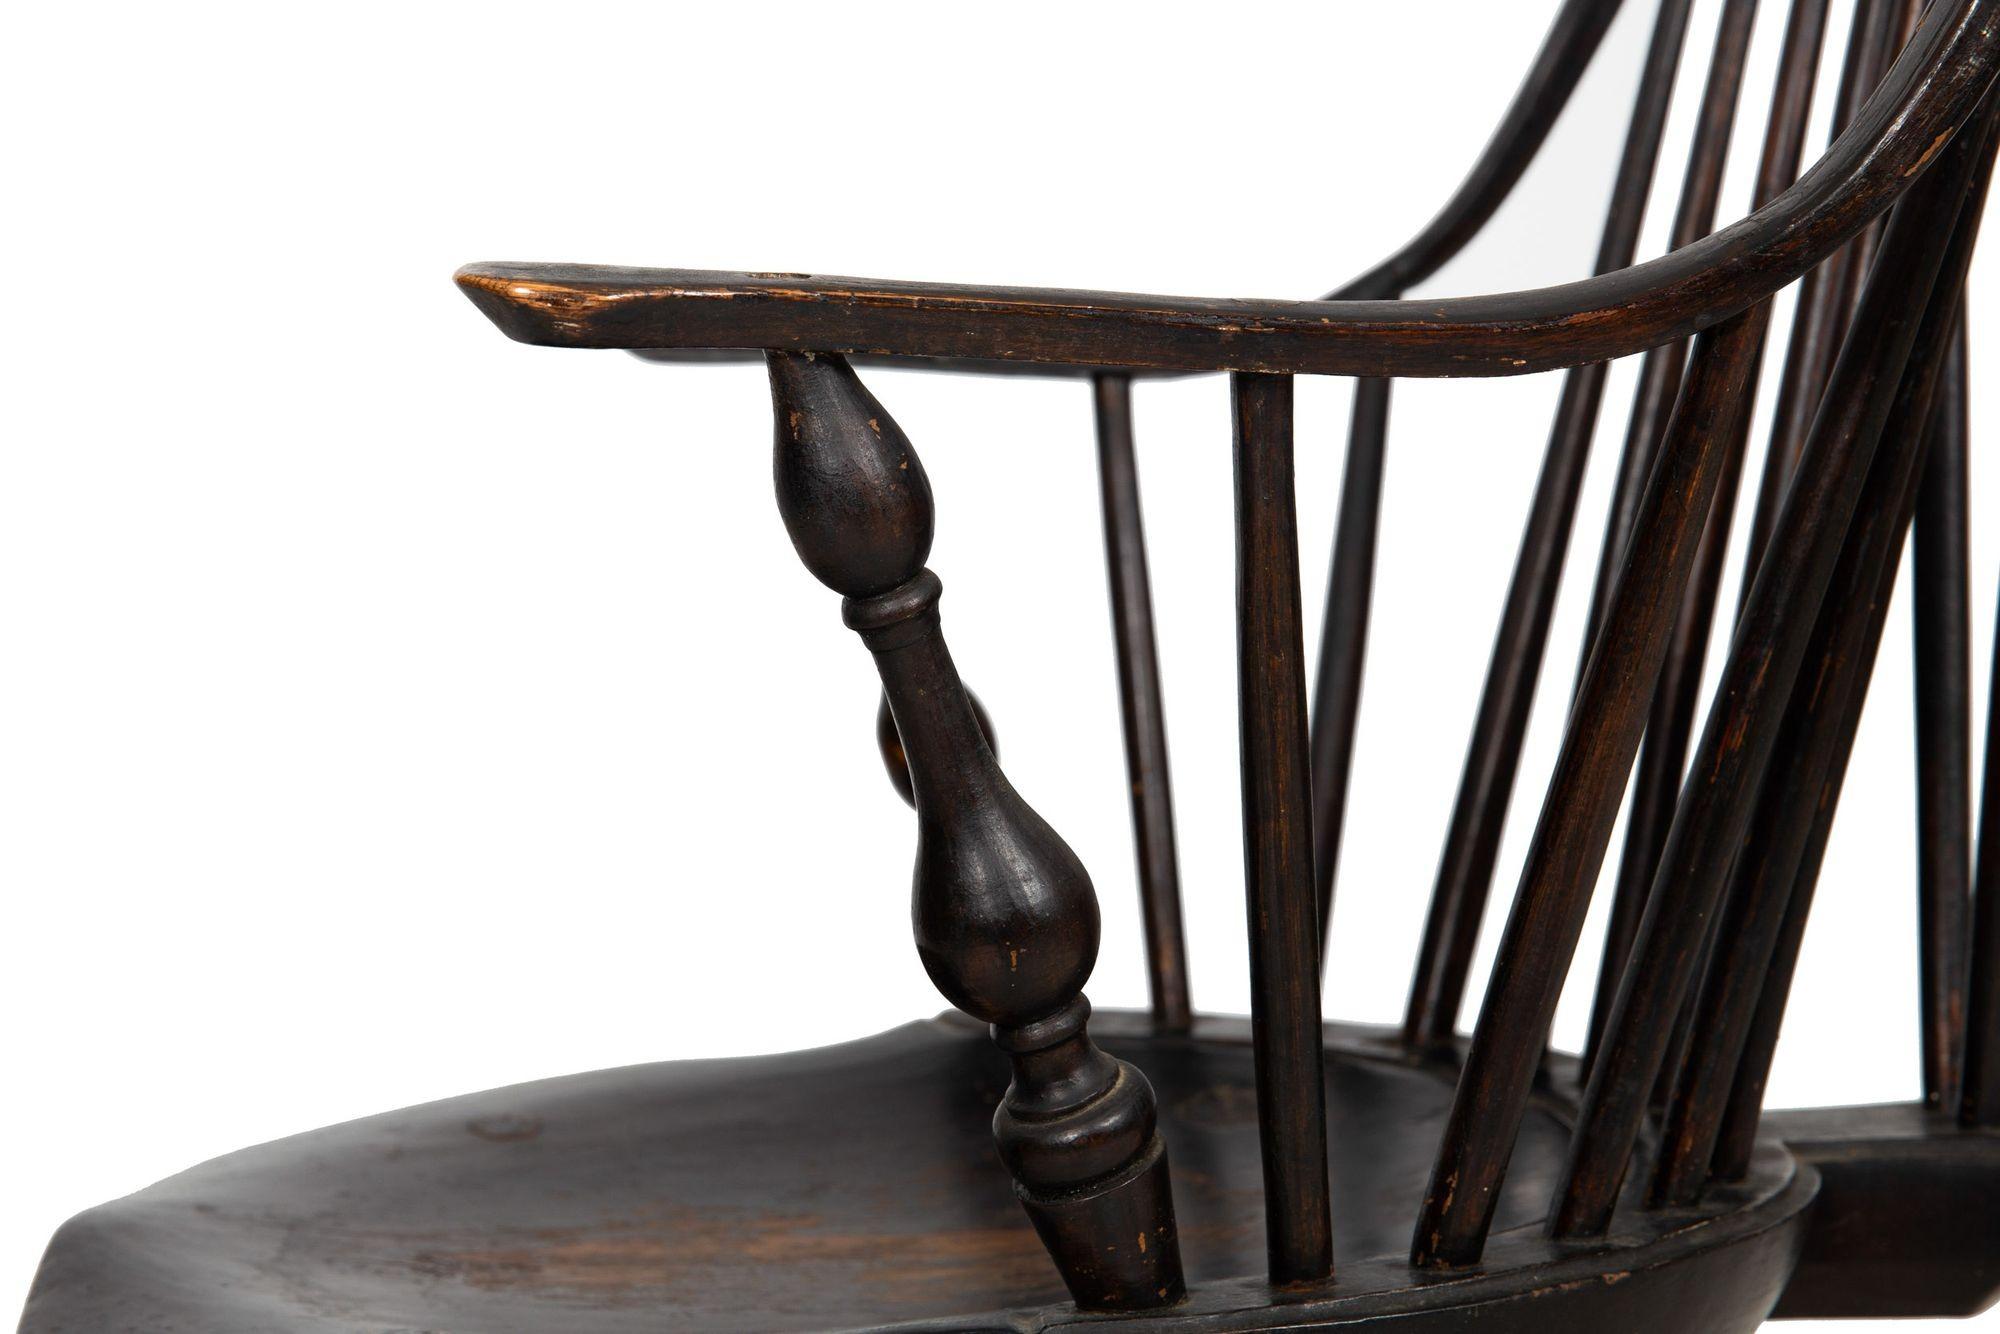 Rare American Brace-Back Continuous Arm Windsor Chair, New York ca. 1790 9